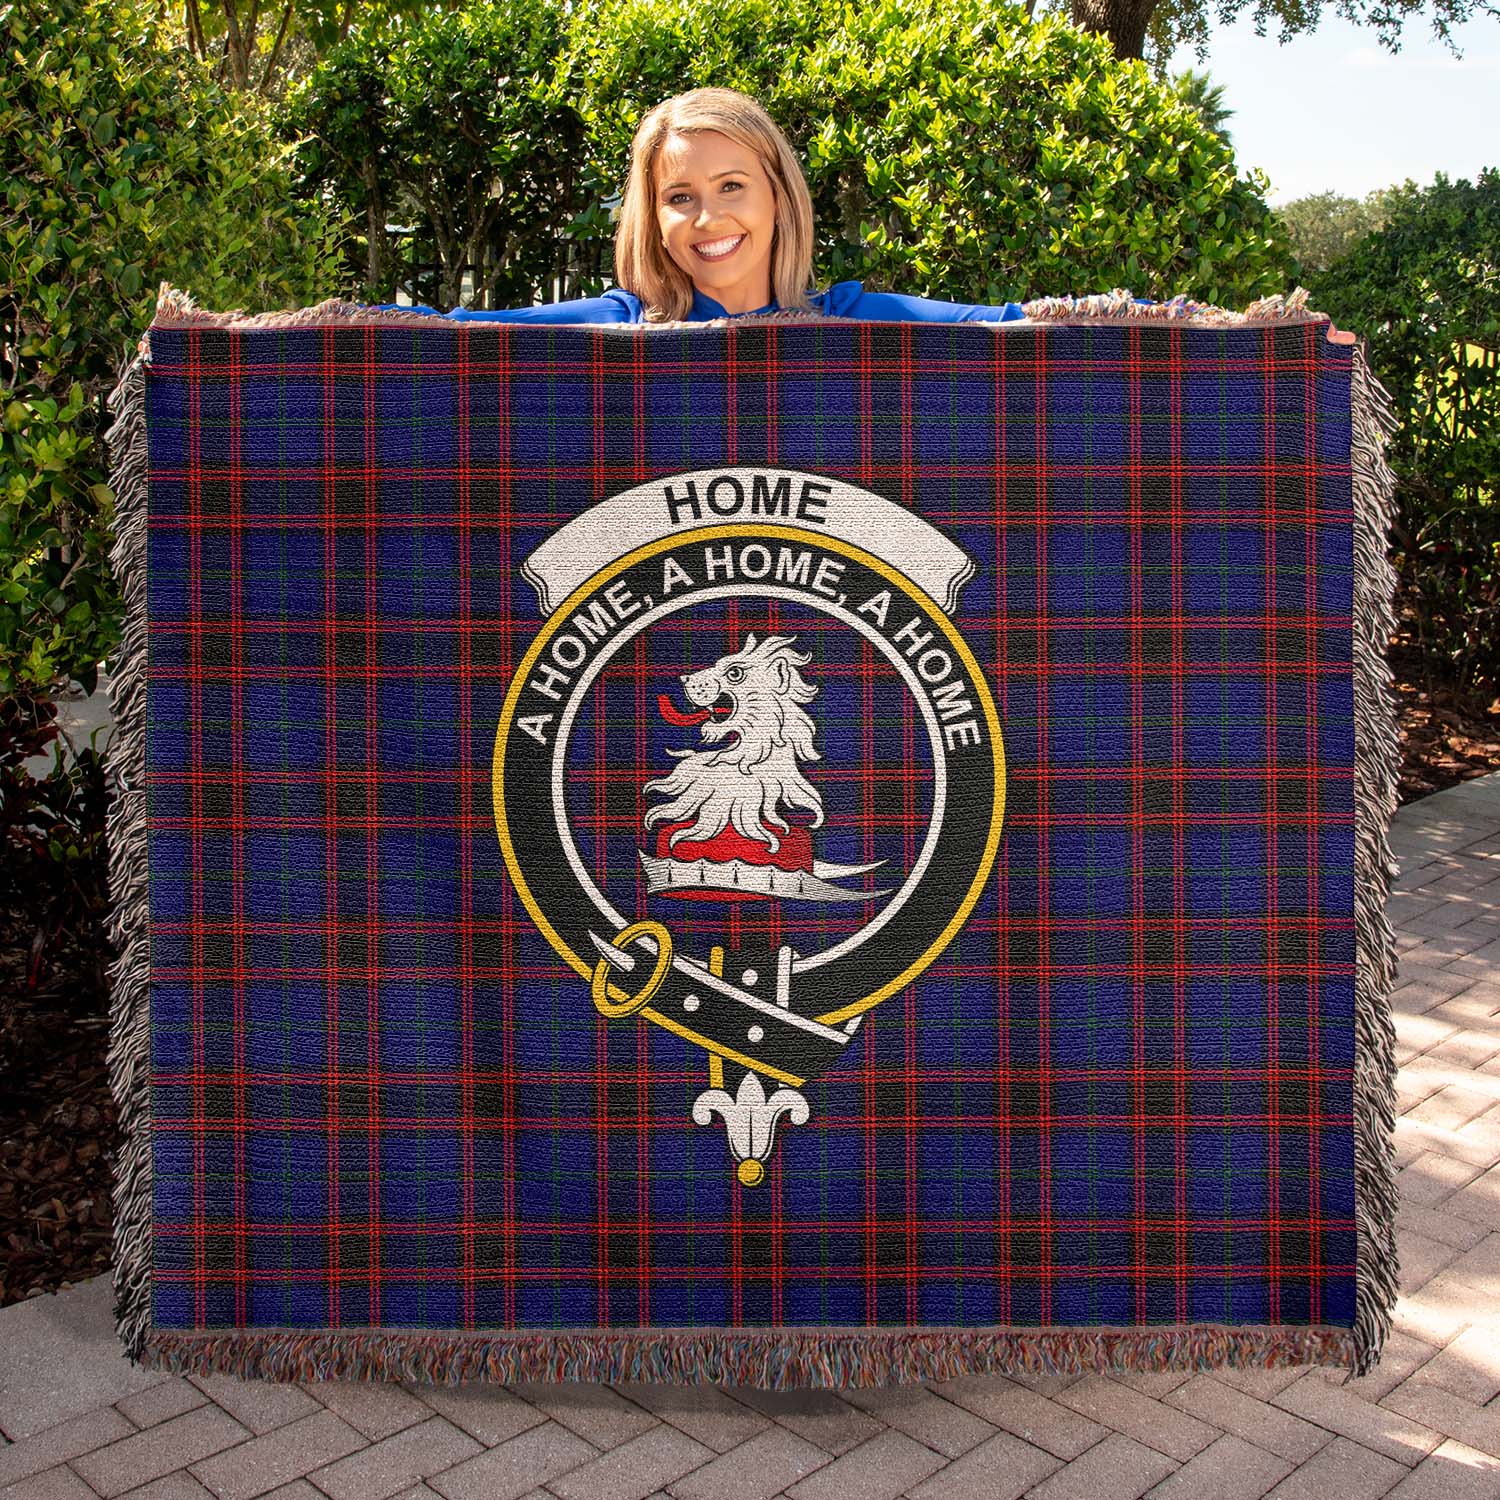 Tartan Vibes Clothing Home Modern Tartan Woven Blanket with Family Crest